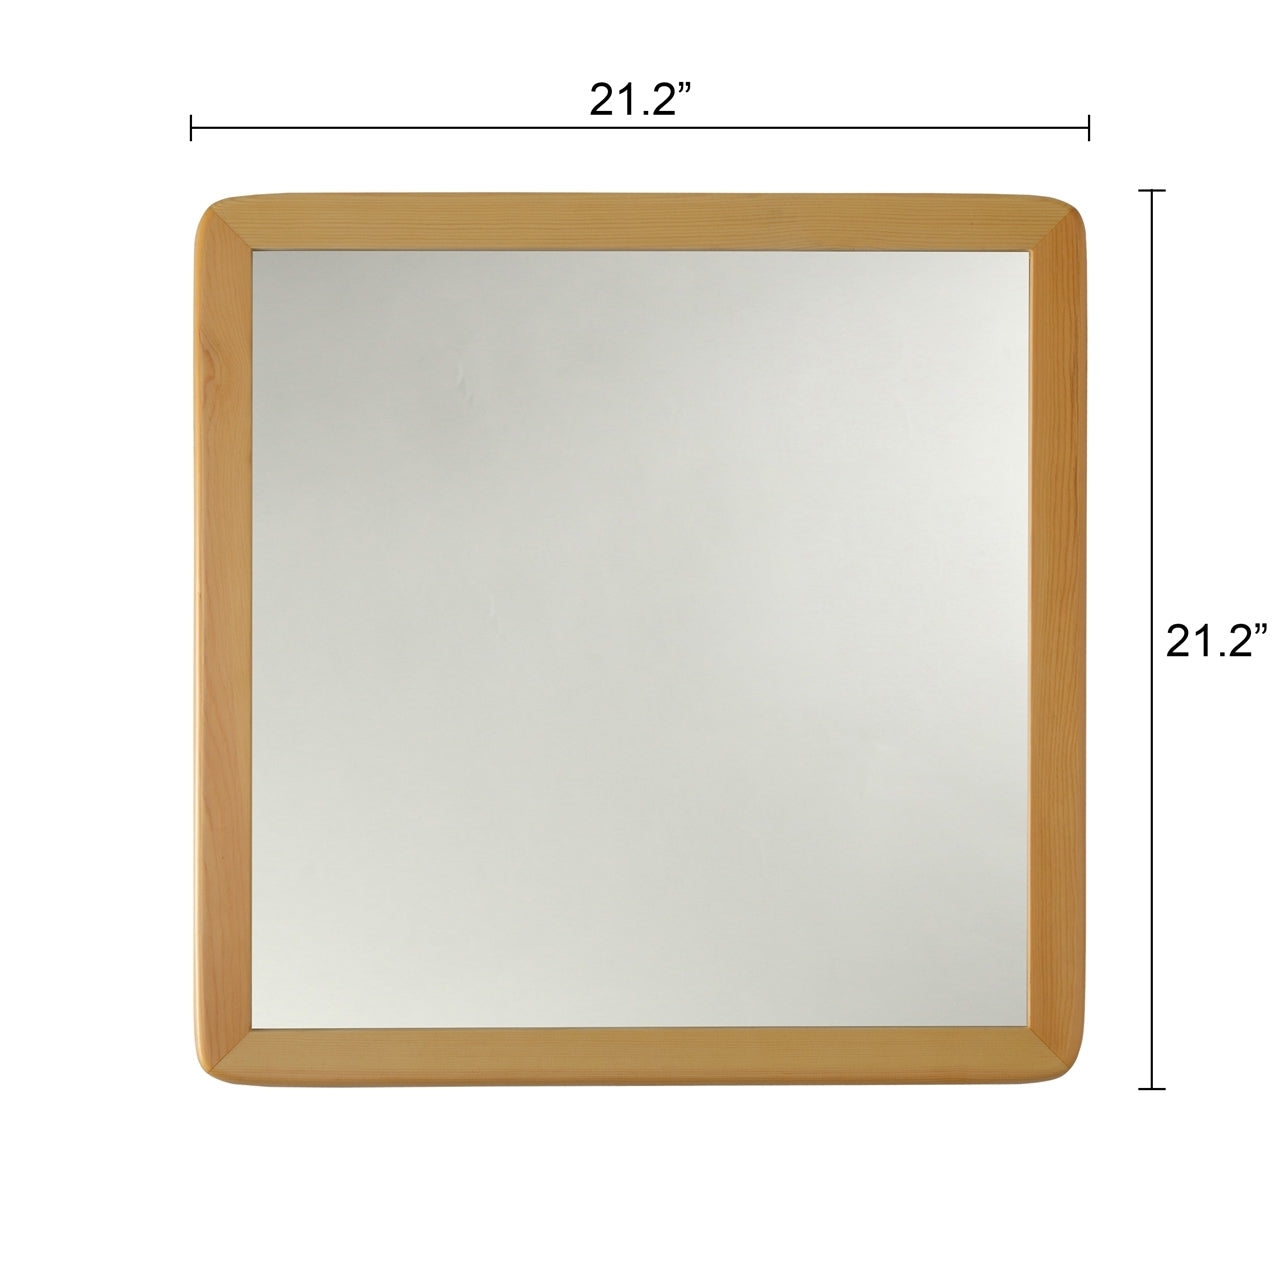 Reflection Maple Finish Square Framed Wall Mirror 21" Height